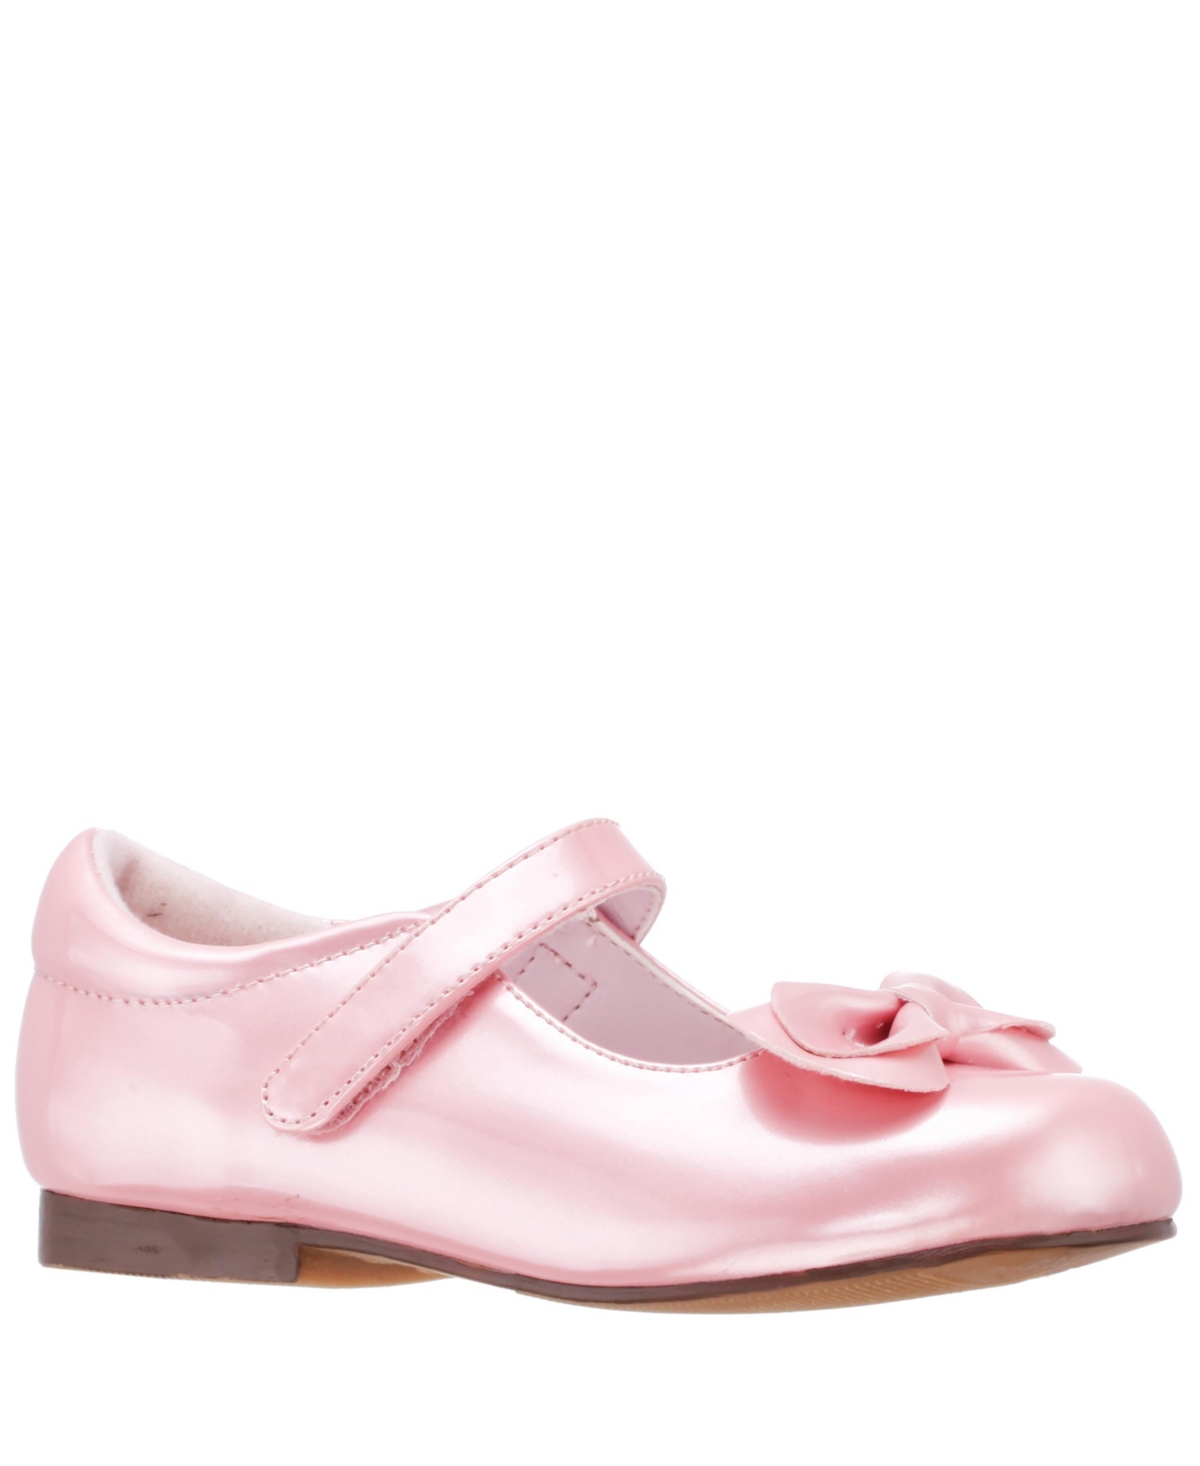 Shop Nina Little Girls Krista Mary Jane Dress Shoes In Blush Pearlized Patent